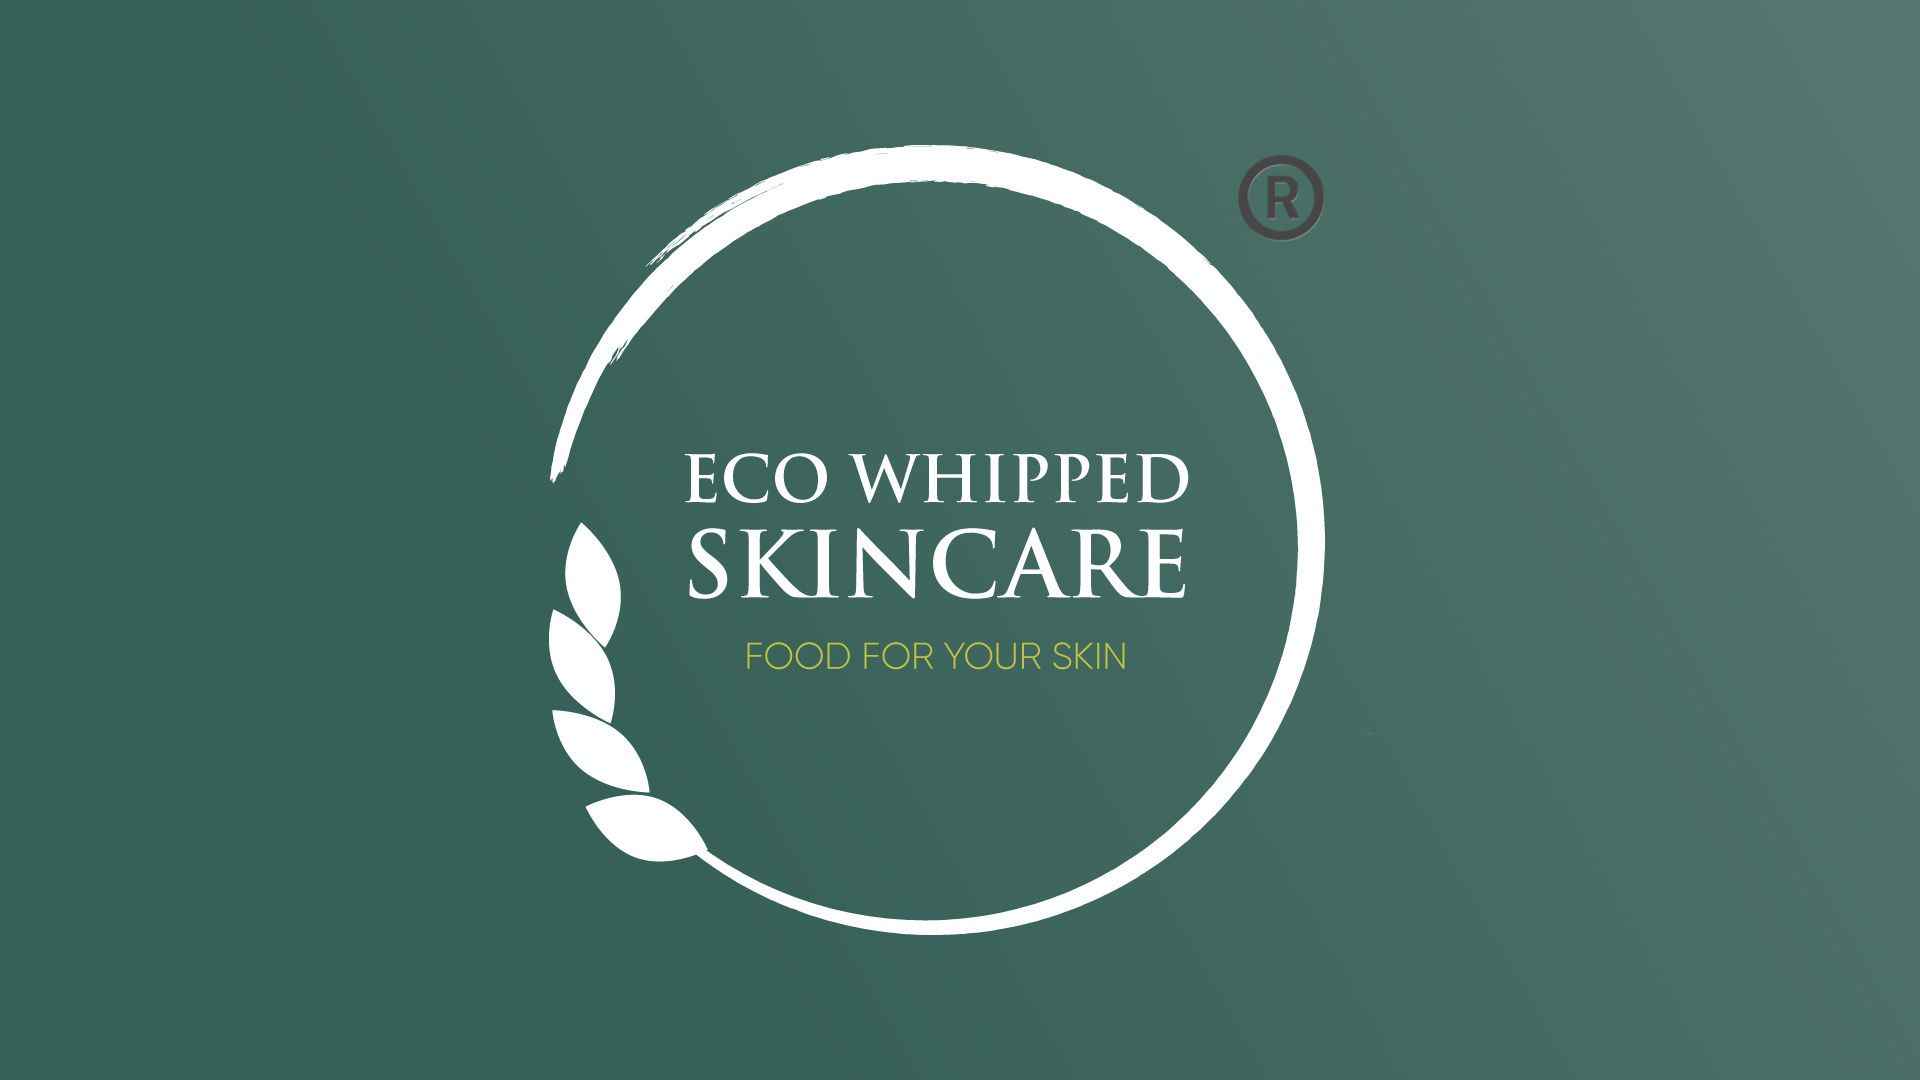 This shop is called EcoWhippedSkincare 